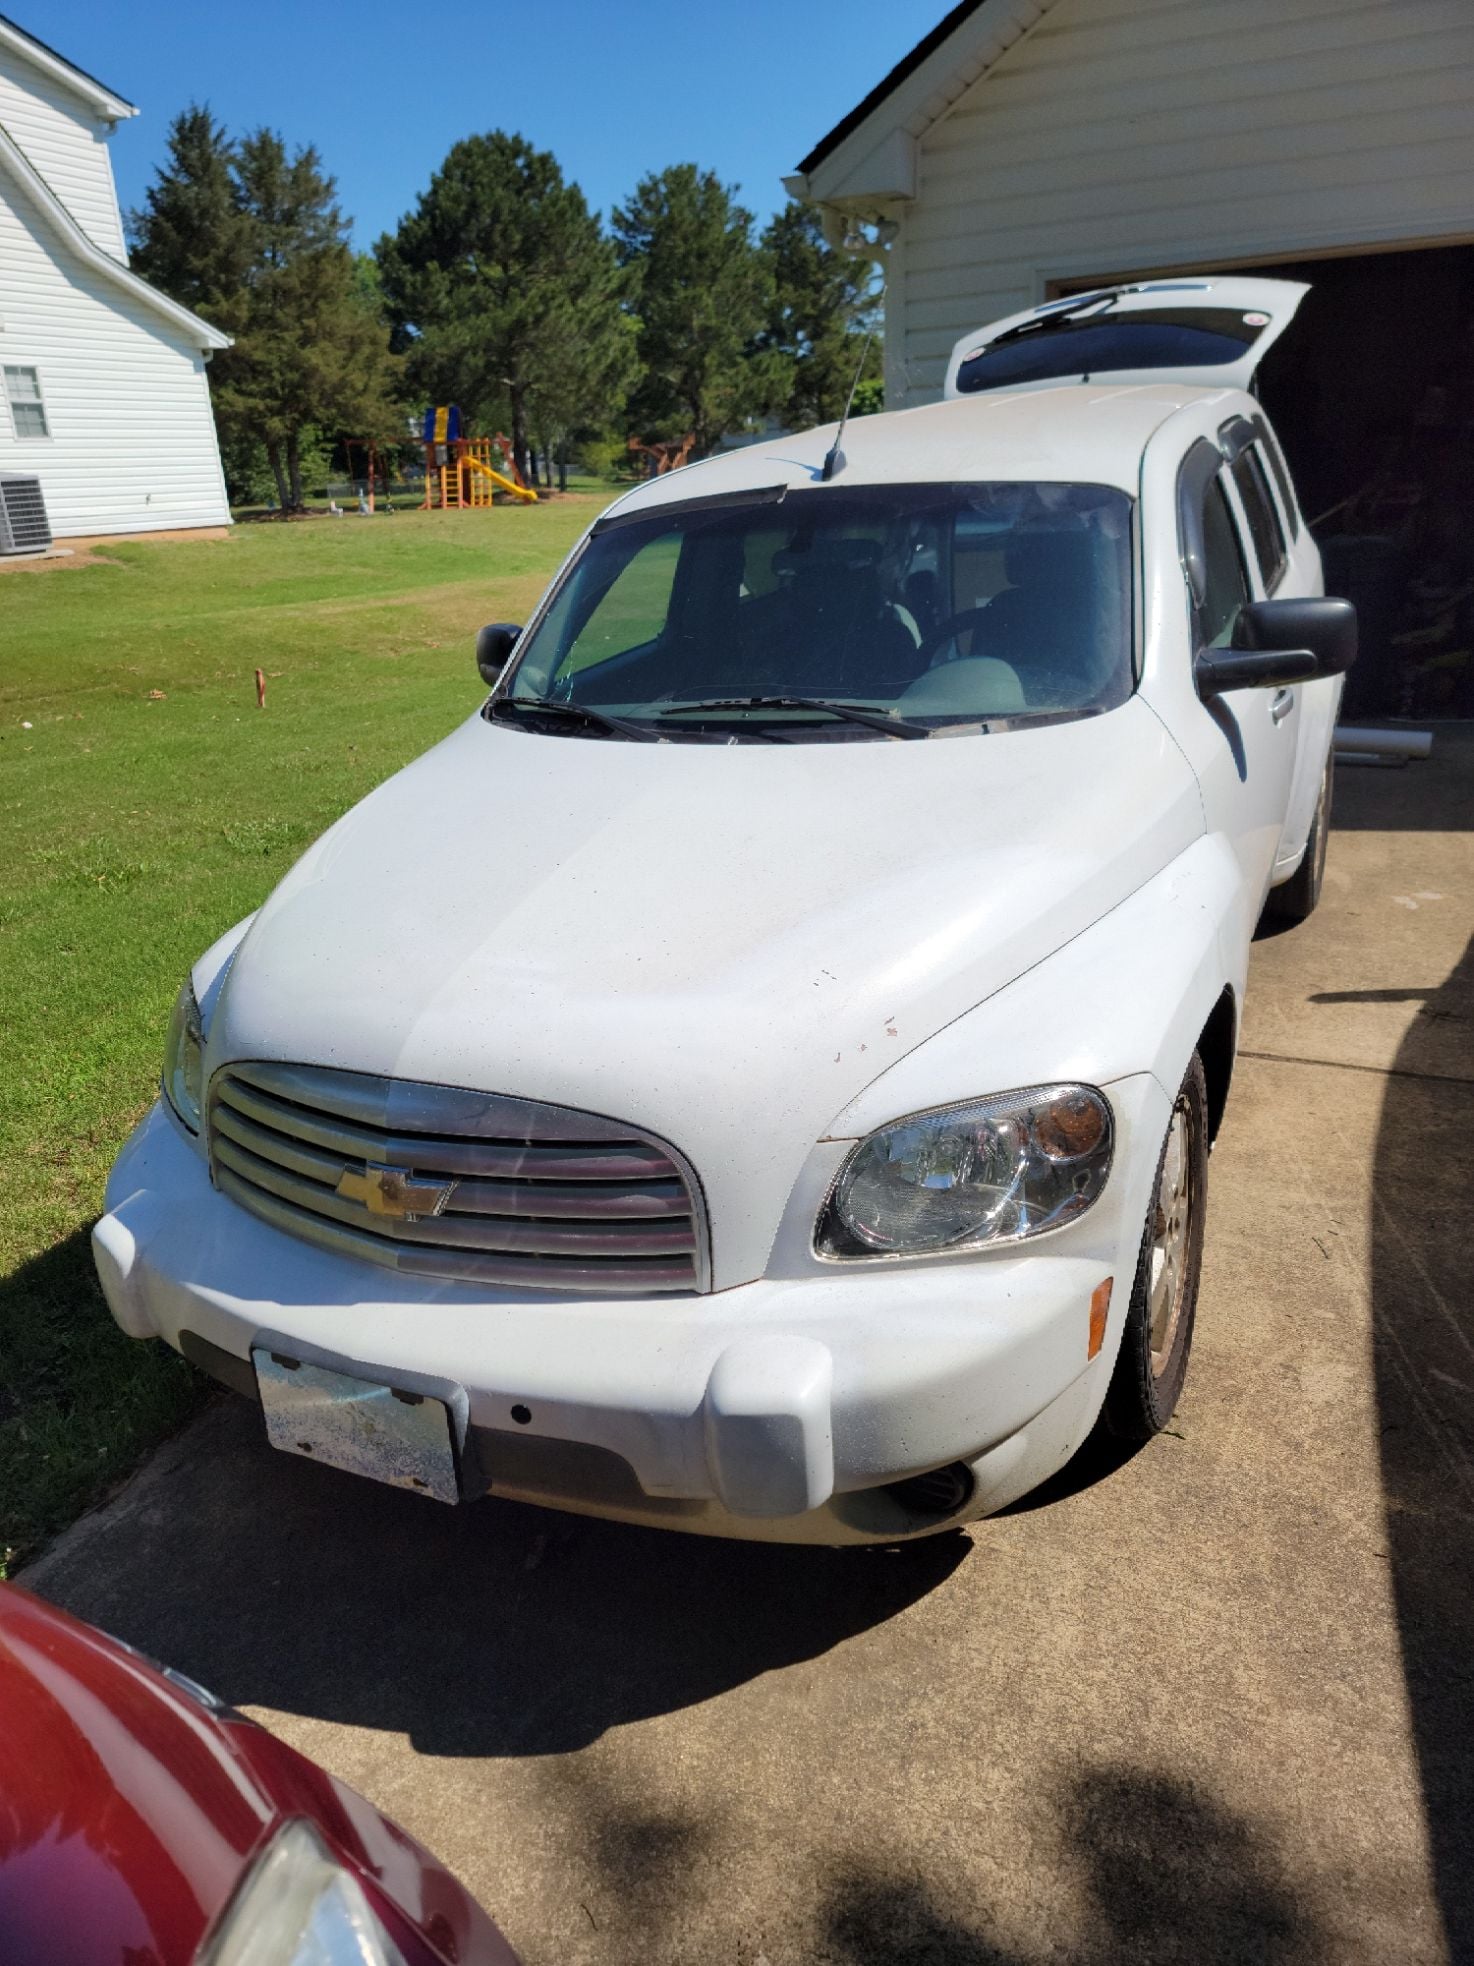 2011 Chevrolet HHR - HHR Project car possibly for HHR truck - Used - VIN 3GNDA13DX7S622912 - 385,961 Miles - 4 cyl - 2WD - Automatic - Wagon - White - Bethlehem, GA 30620, United States